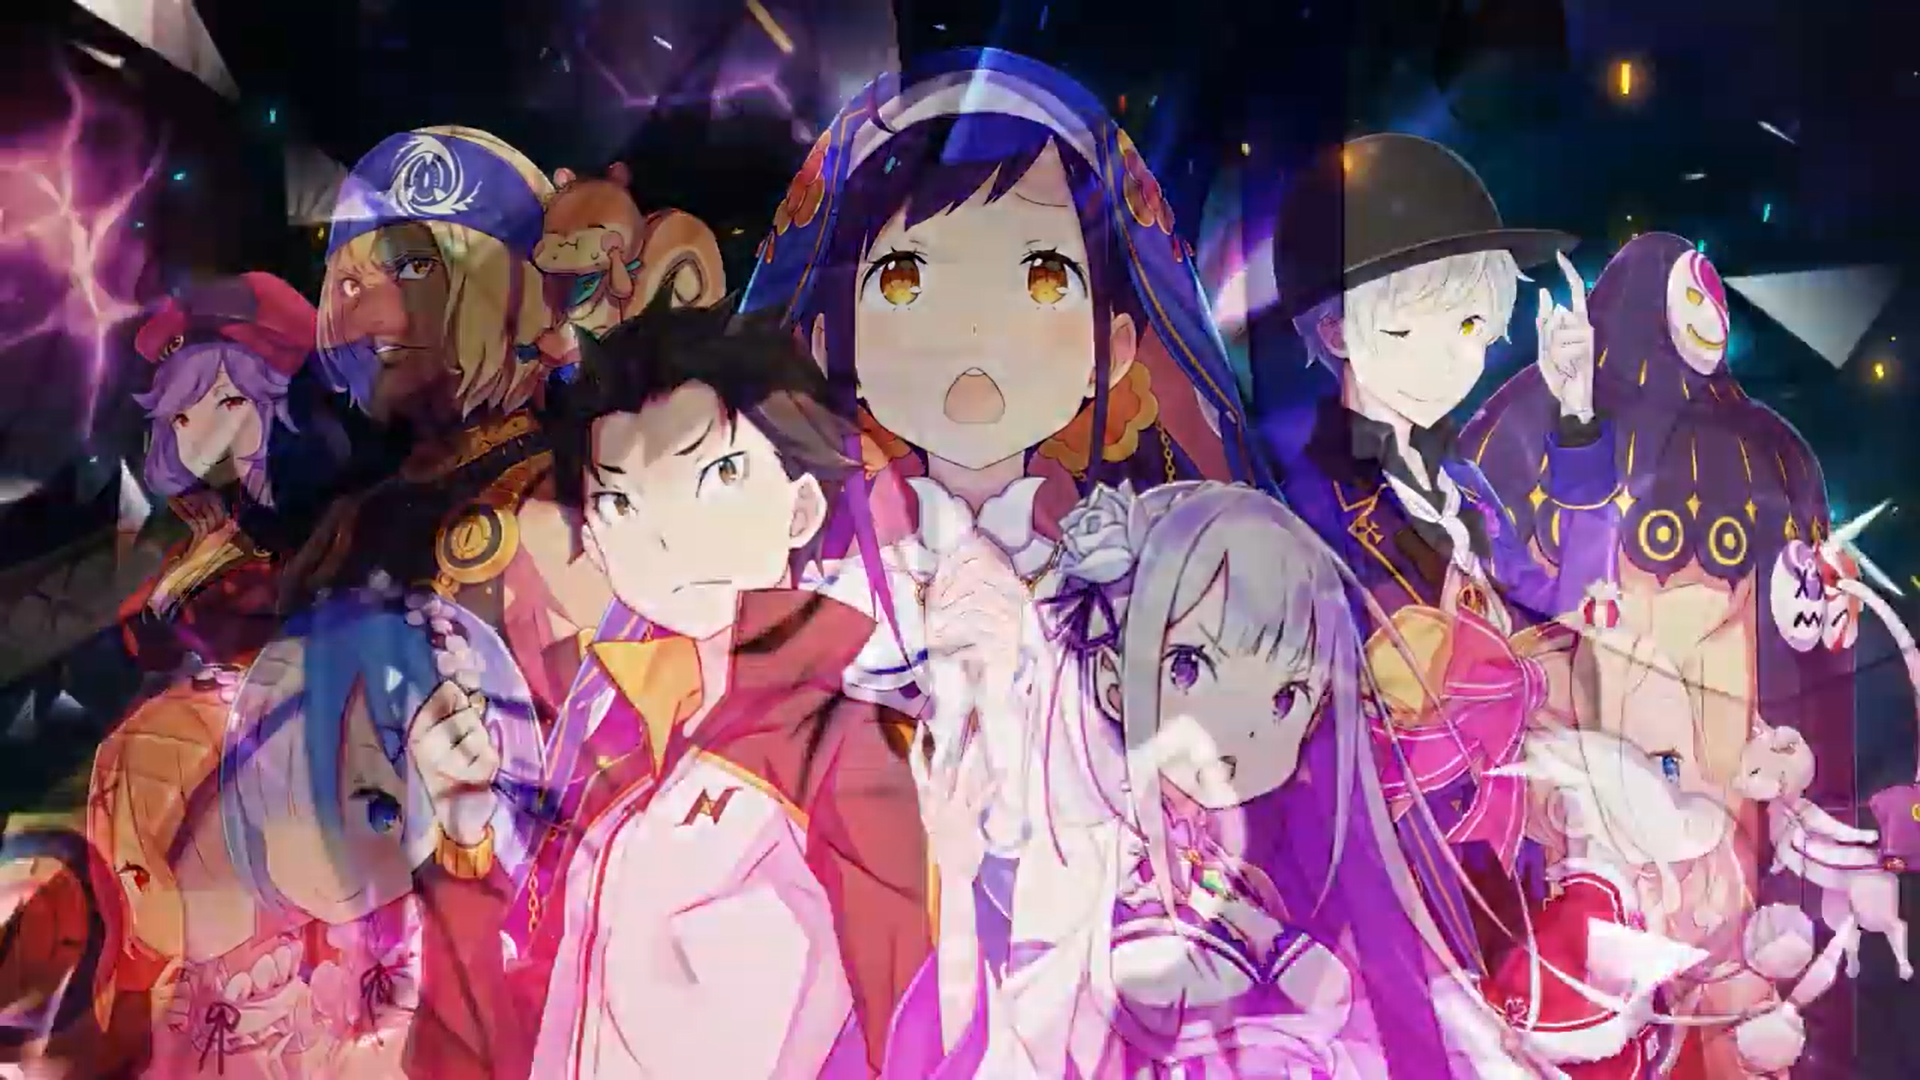 Re switched. Re:Zero -starting Life in another World- the Prophecy of the Throne. Re Zero эндинг. Re Zero the Prophecy of the Throne русификатор. Re:Zero – starting Life in another World: the Prophecy of the Throne русификатор.